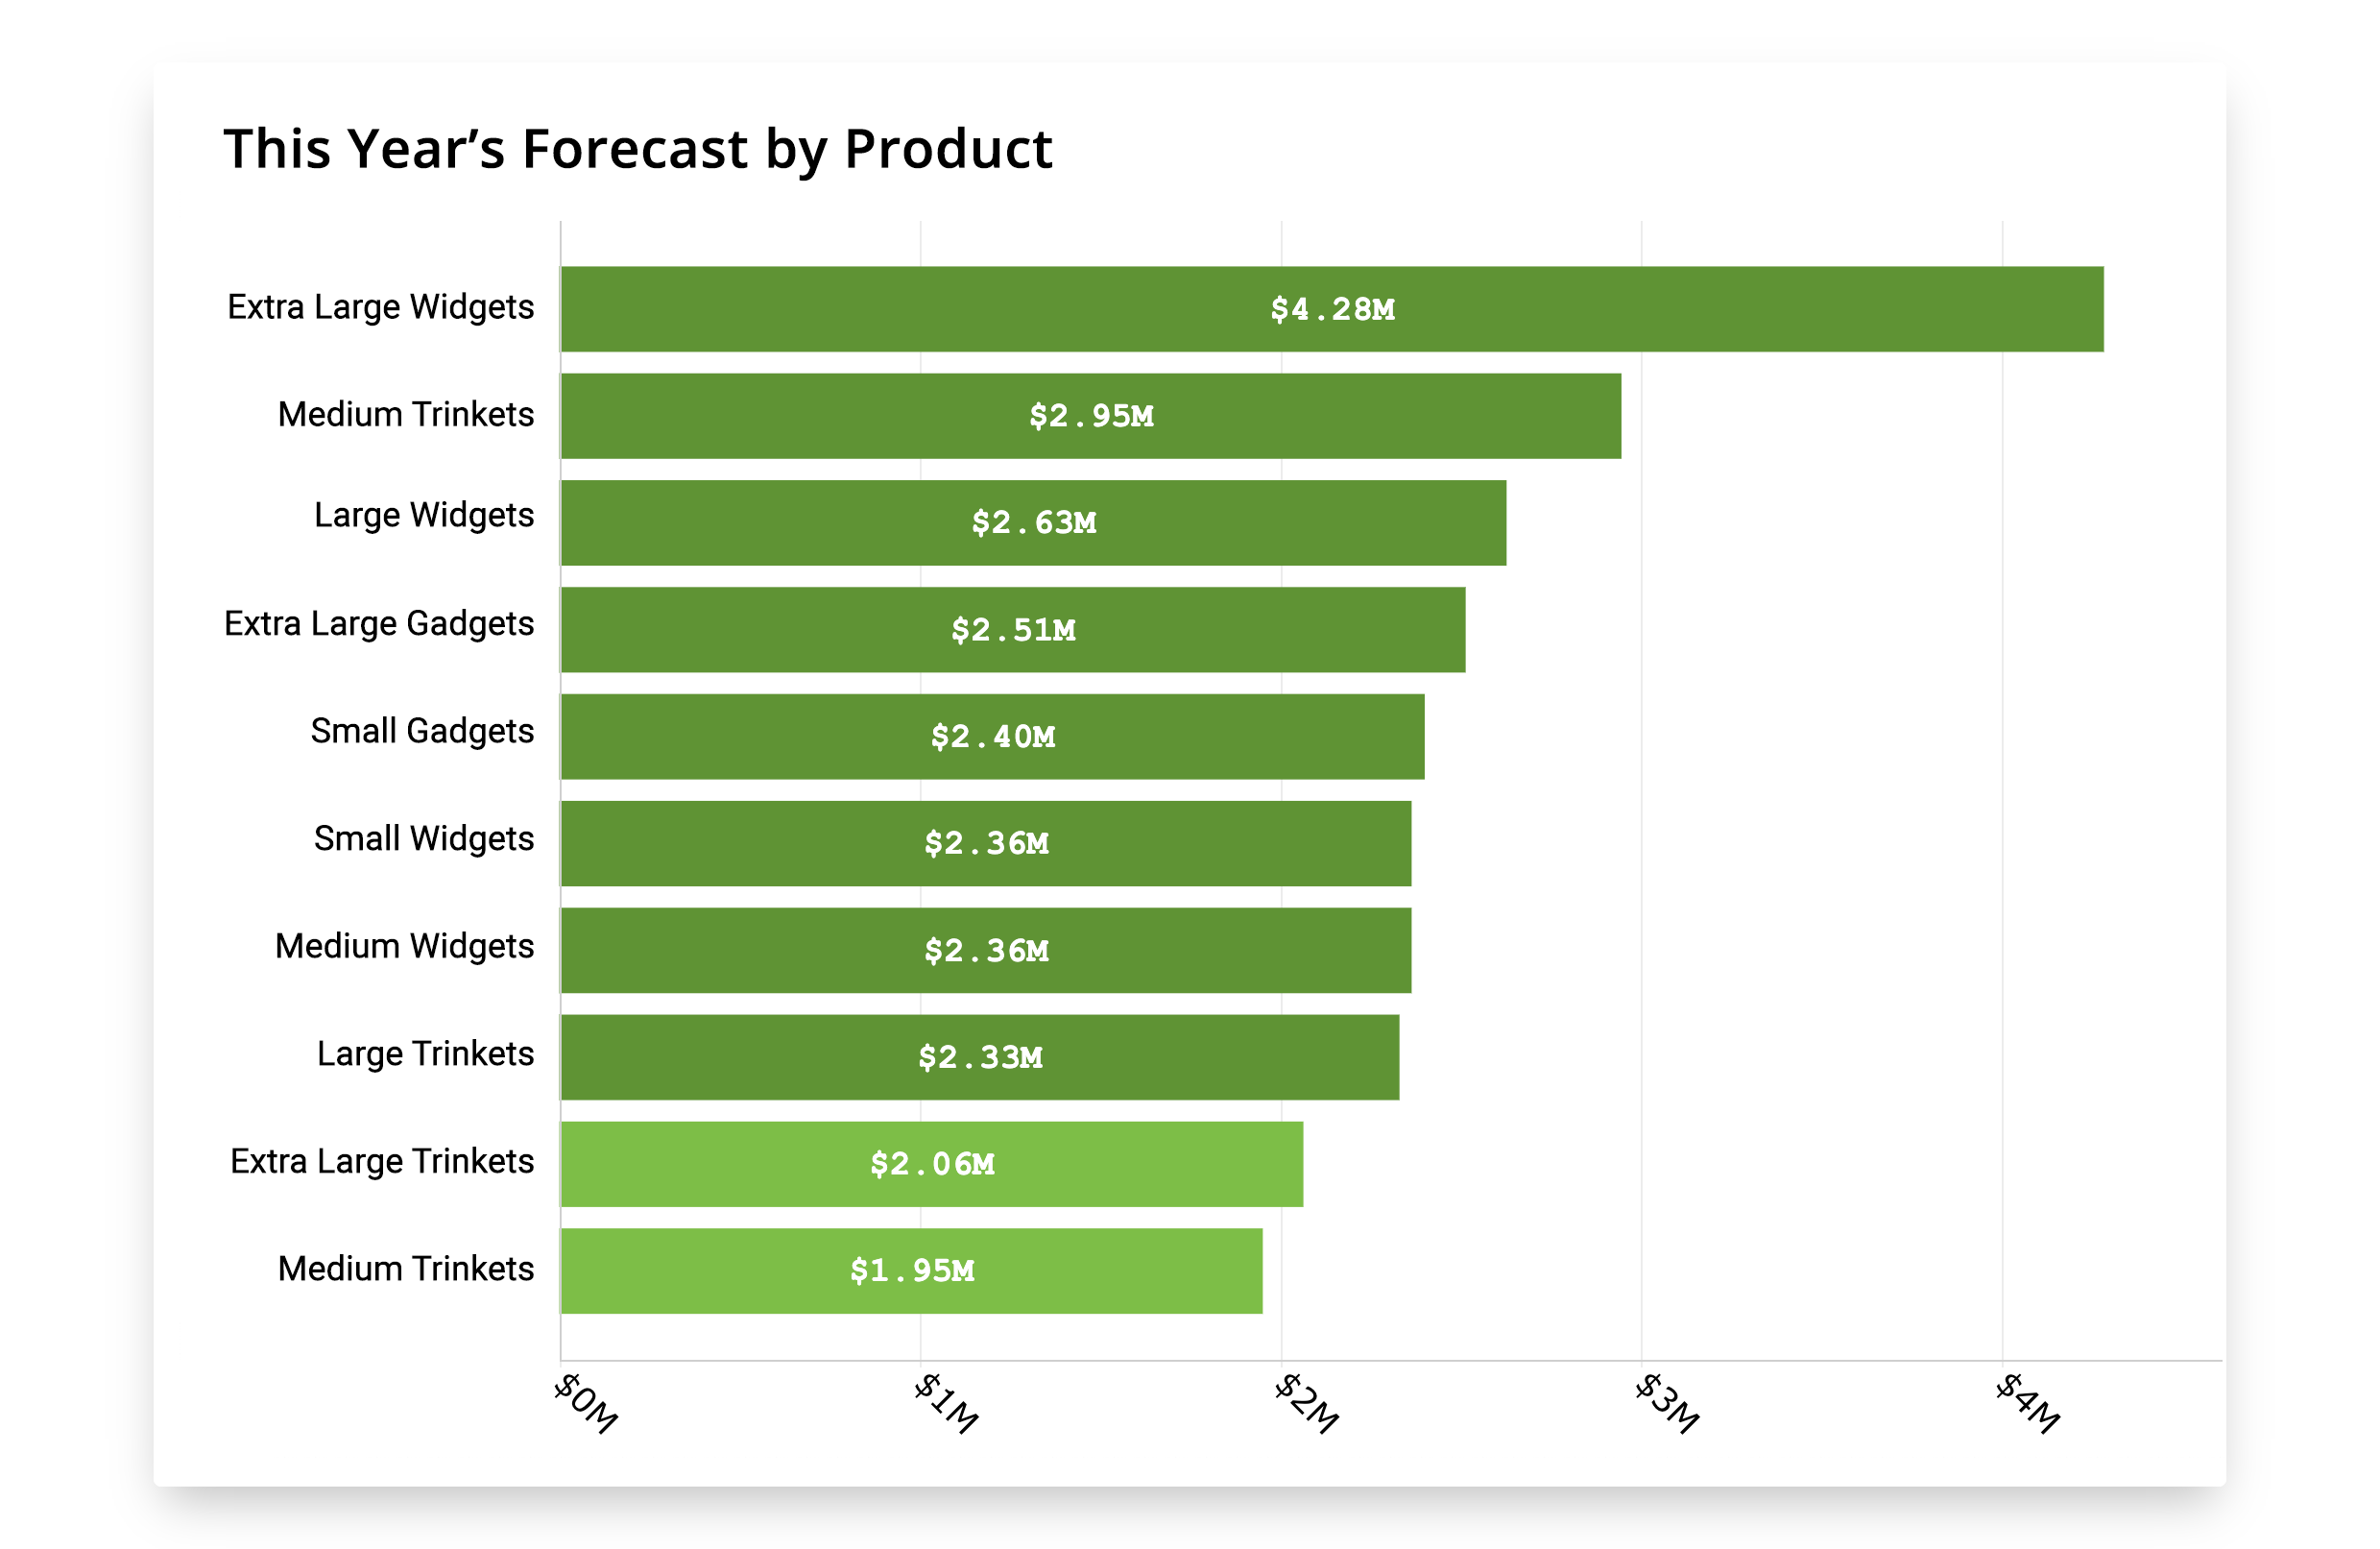 By connecting to your ERP, Spiro allows you to view your pipeline more granularly, including incorporating product-level information into your forecast.